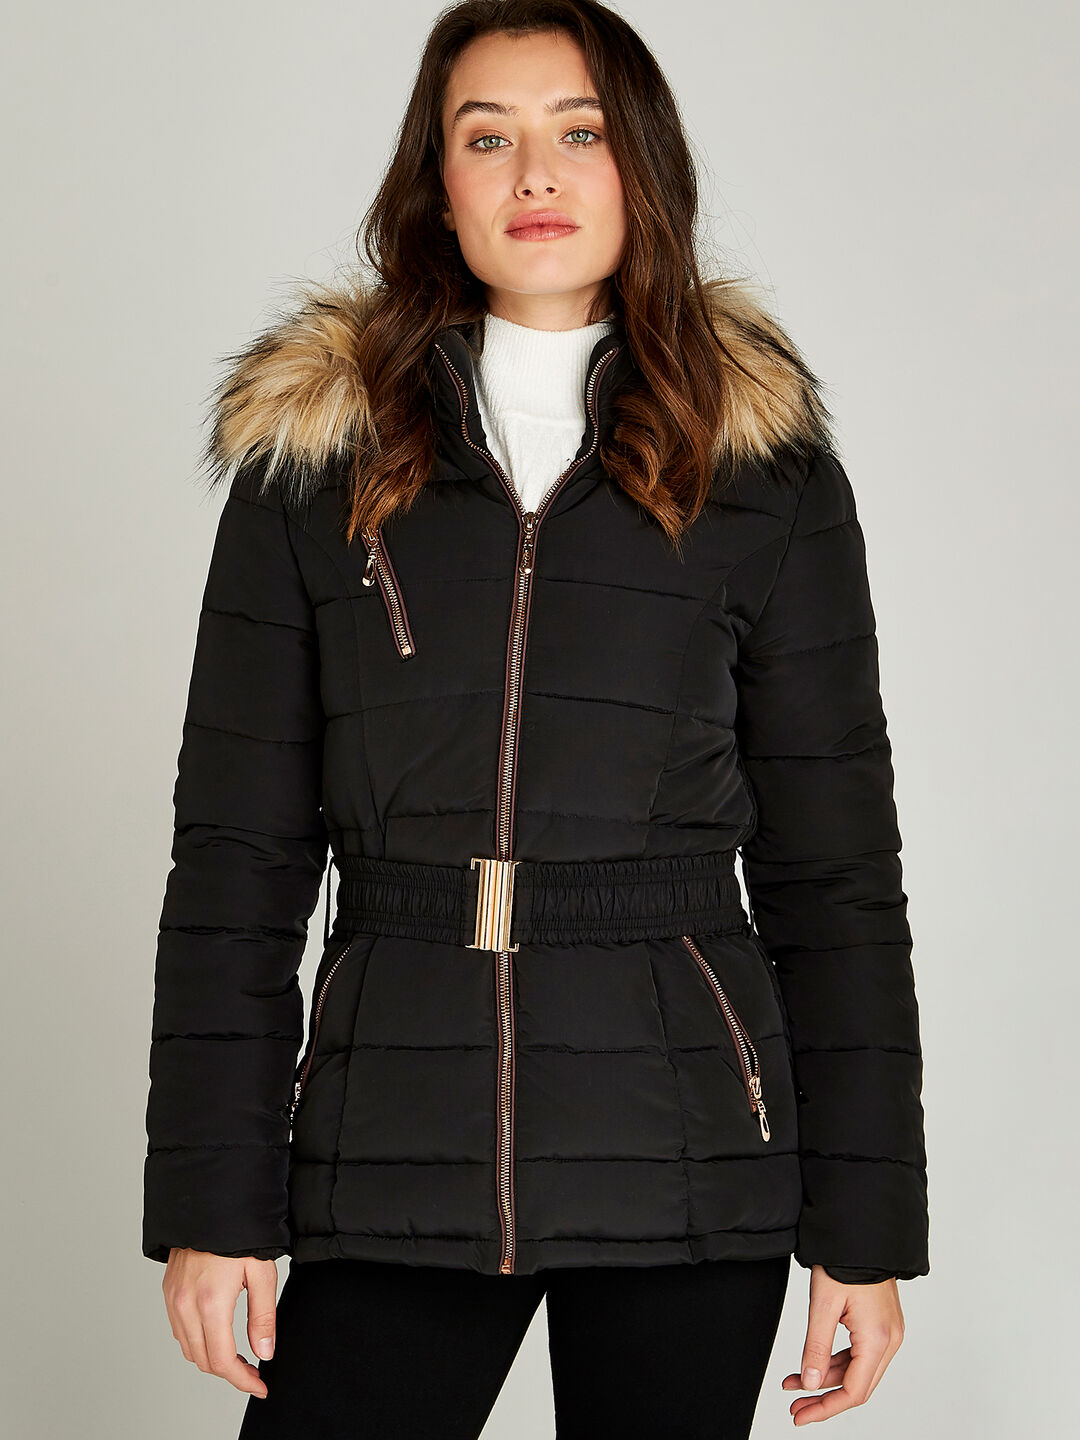 Removable Faux Fur Hood Puffer Jacket